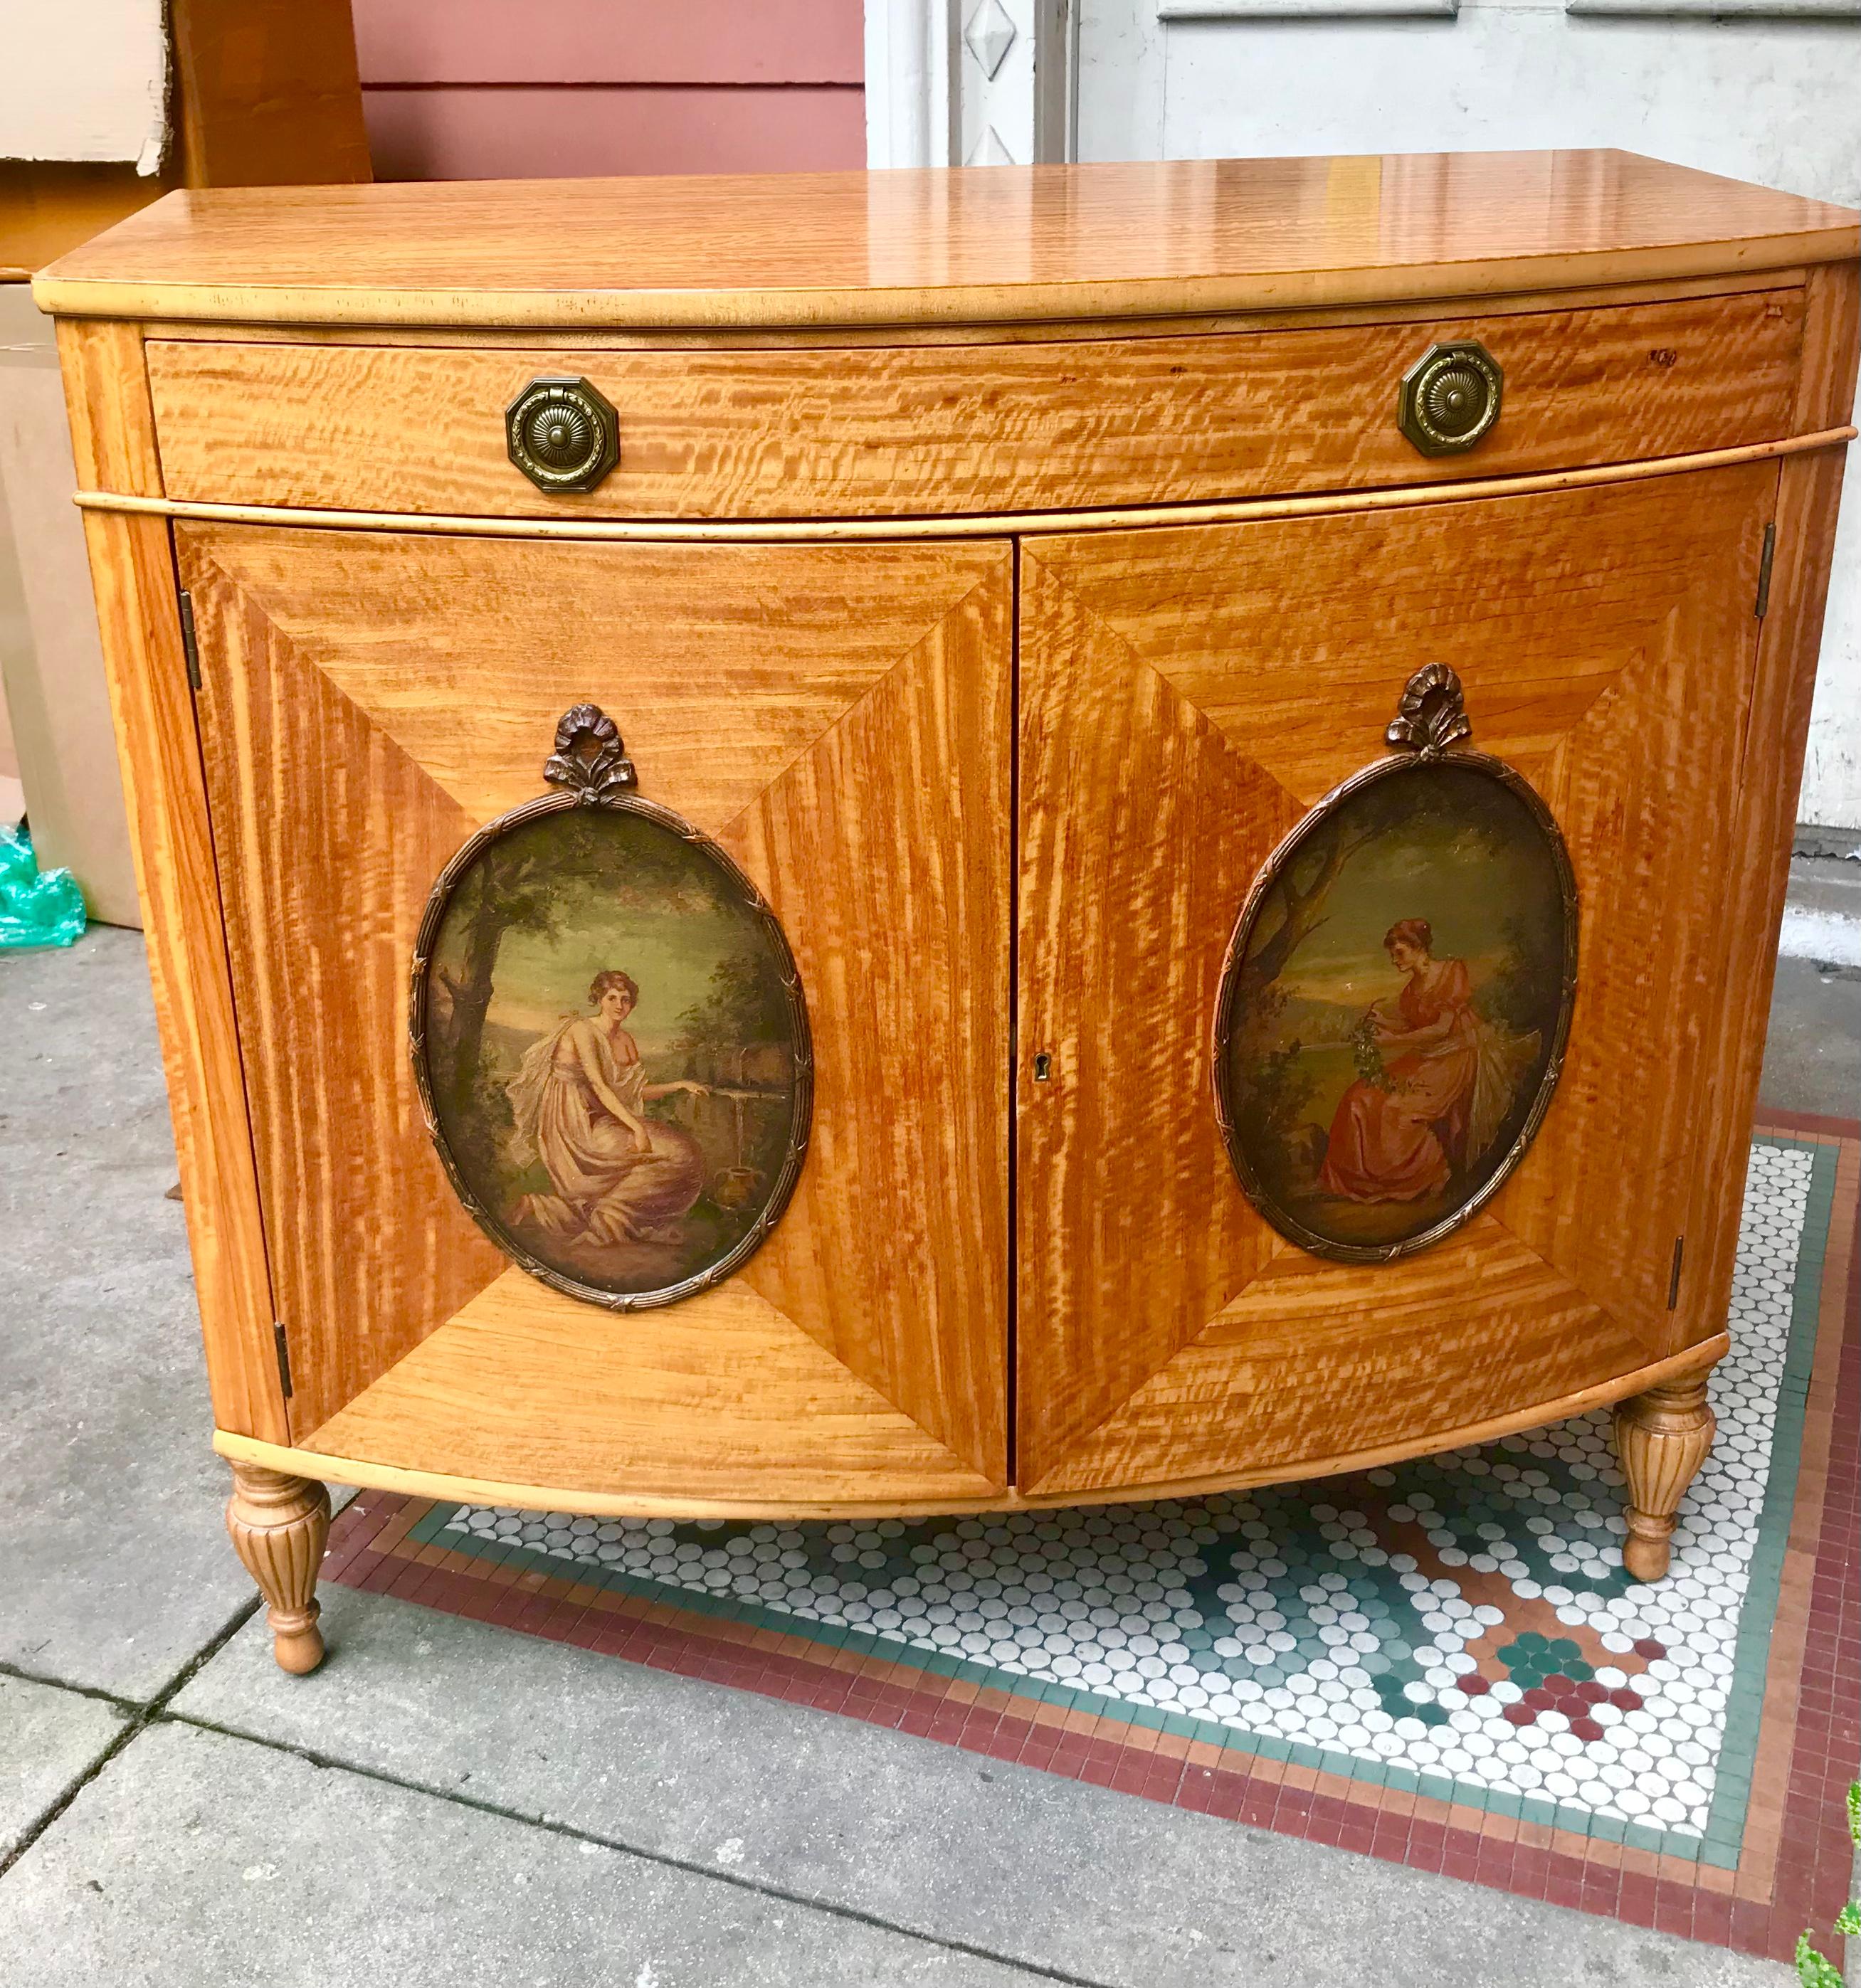 A bowfront cabinet in the Edwardian satinwood style with oval insets of classical ladies in the manner of Adam Painter 
Angelica Kauffman . Presents very well .Beautifully rippled wood graining that changes as you move in almost pristine condition .